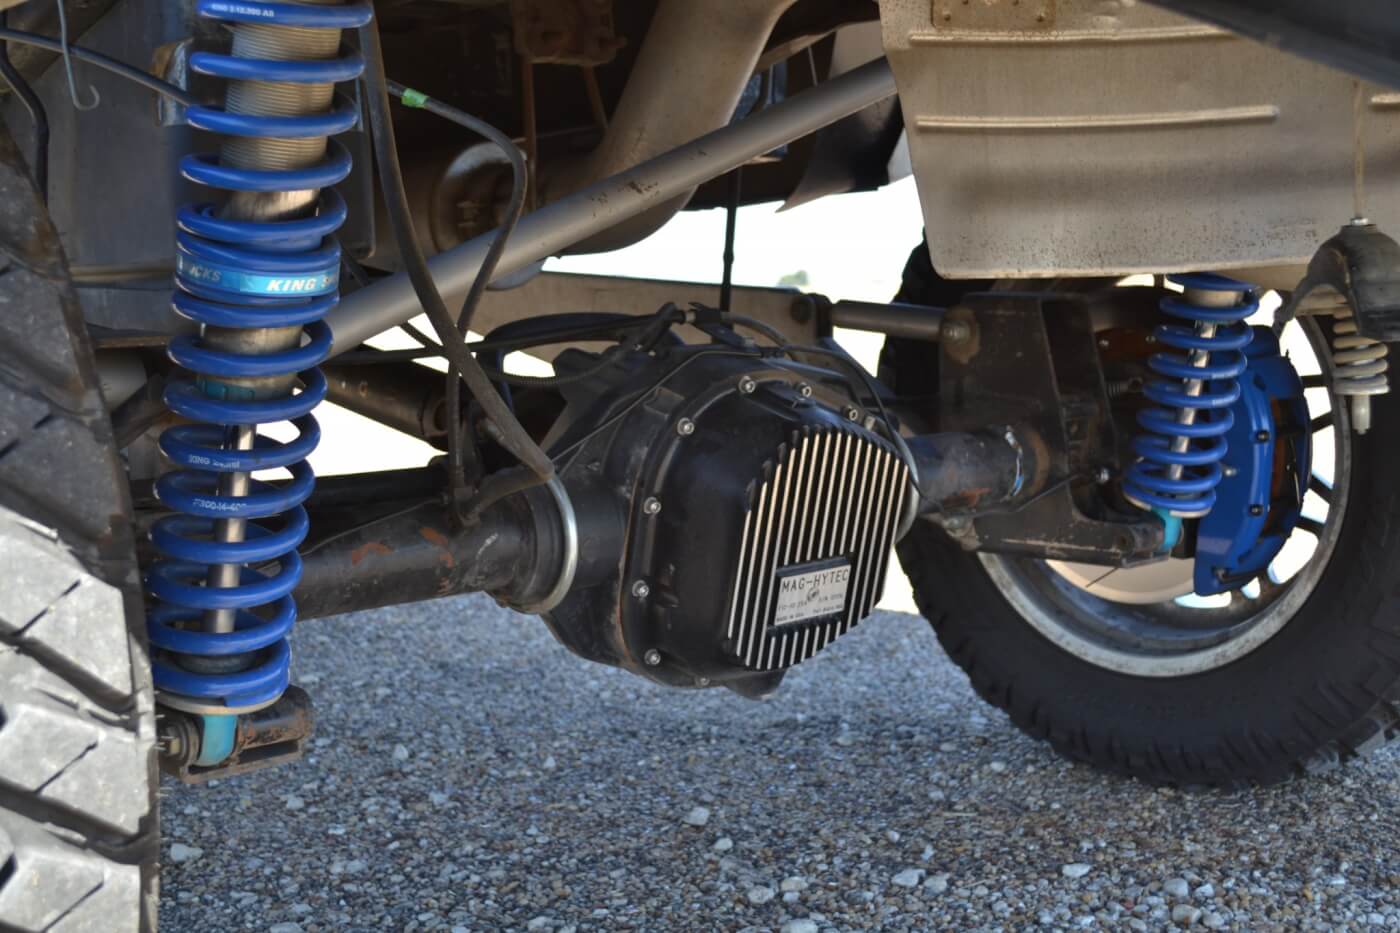 The rear suspension has been upgraded with 4.33 gears, a Mag-Hytec rear differential cover, and 300M RCV axle shafts. The rear shocks are 2.5-inch King coilovers that provide a whopping 12 inches of travel.